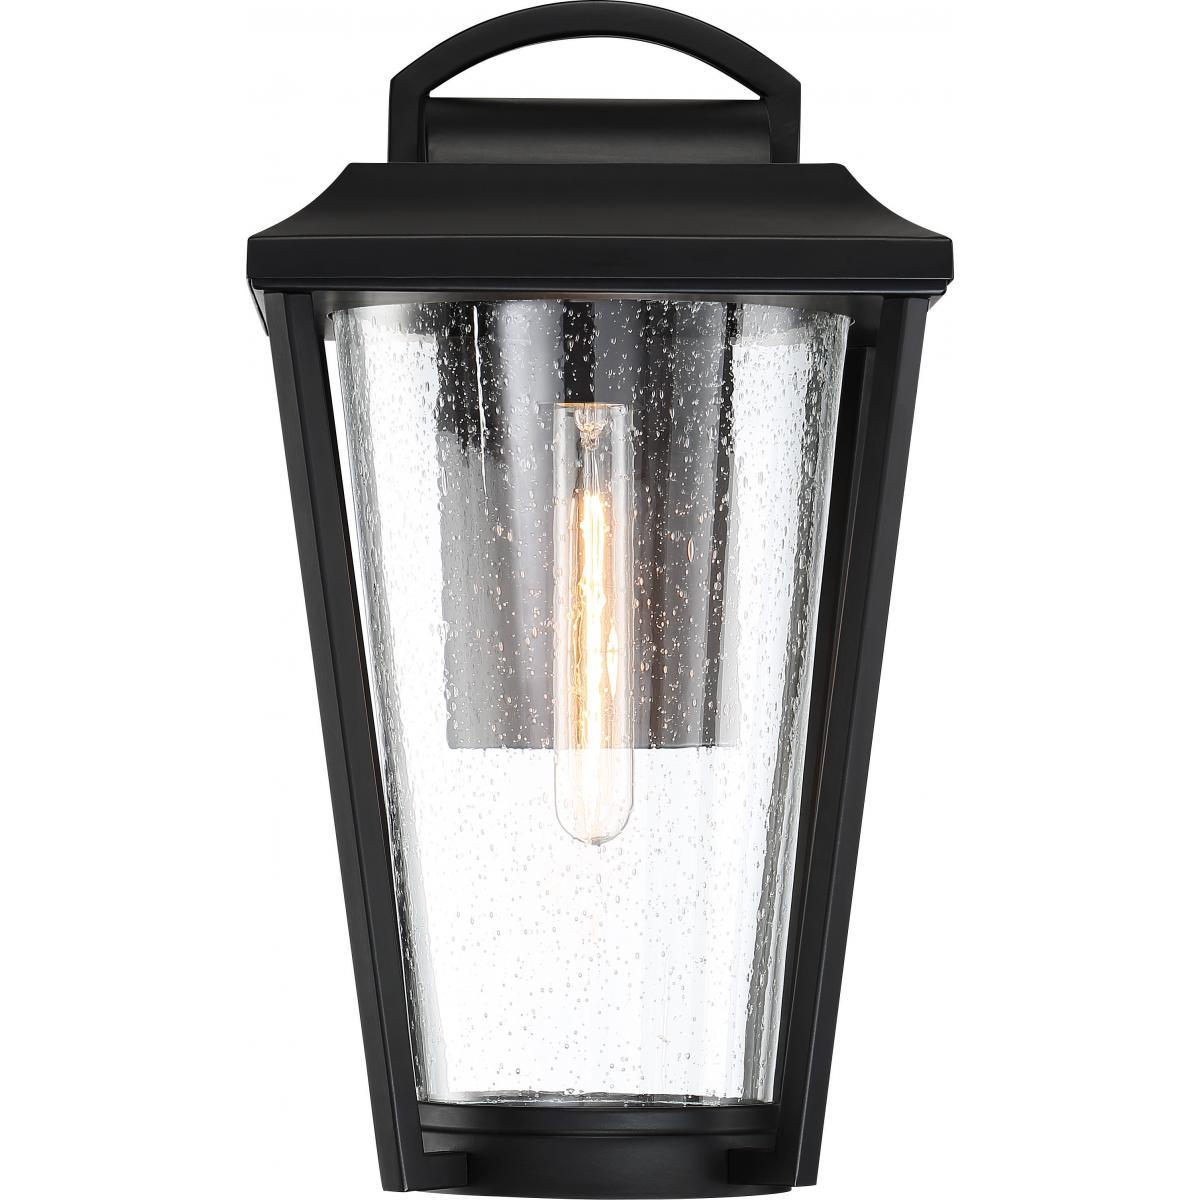 Lakeview 12.25"h Outdoor Wall Light Outdoor Nuvo Lighting 